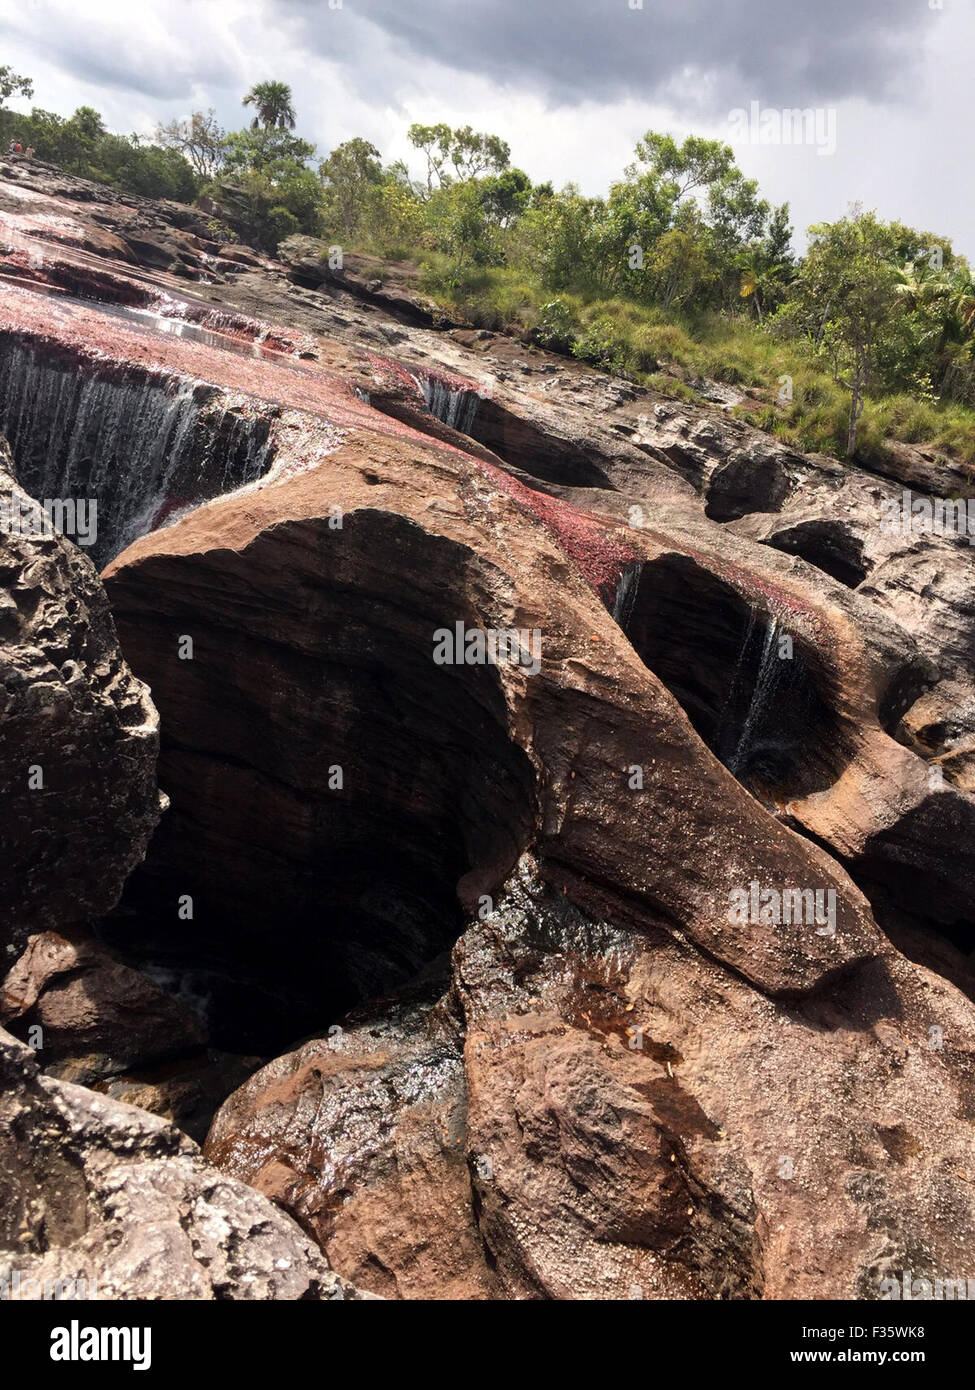 Meta. 29th Sep, 2015. Photo taken on Sept. 29, 2015 shows the Cano Cristales river in La Macarena, Meta, Colombia. According to local press, the access to Cano Cristales will be prohibited from next Oct. 1 because the flow is at the minimum of 30 percent due to 'El nino' phenomenon. Credit:  COLPRENSA/Xinhua/Alamy Live News Stock Photo